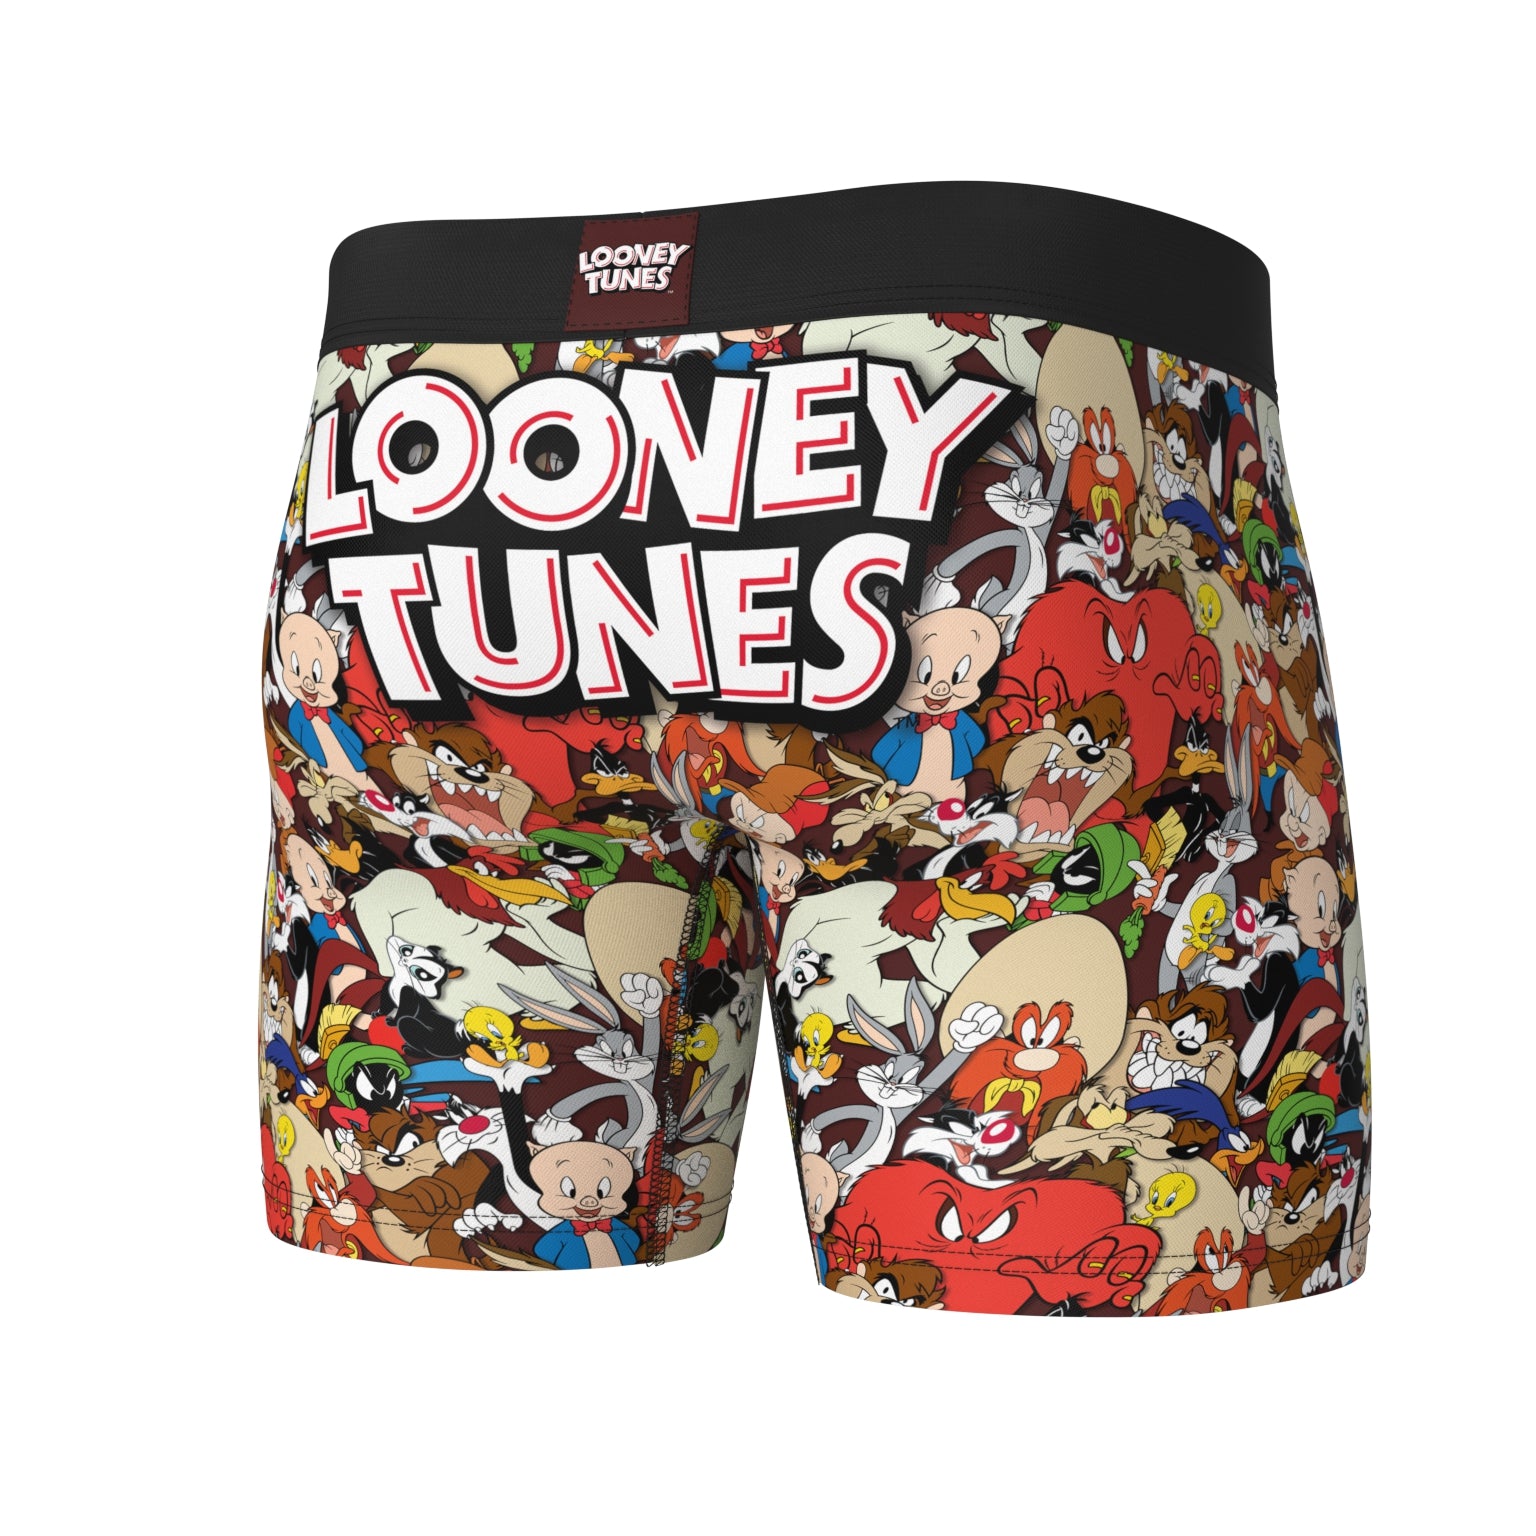 SWAG LOONEY TUNES BOXERS - THE WHOLE GANG